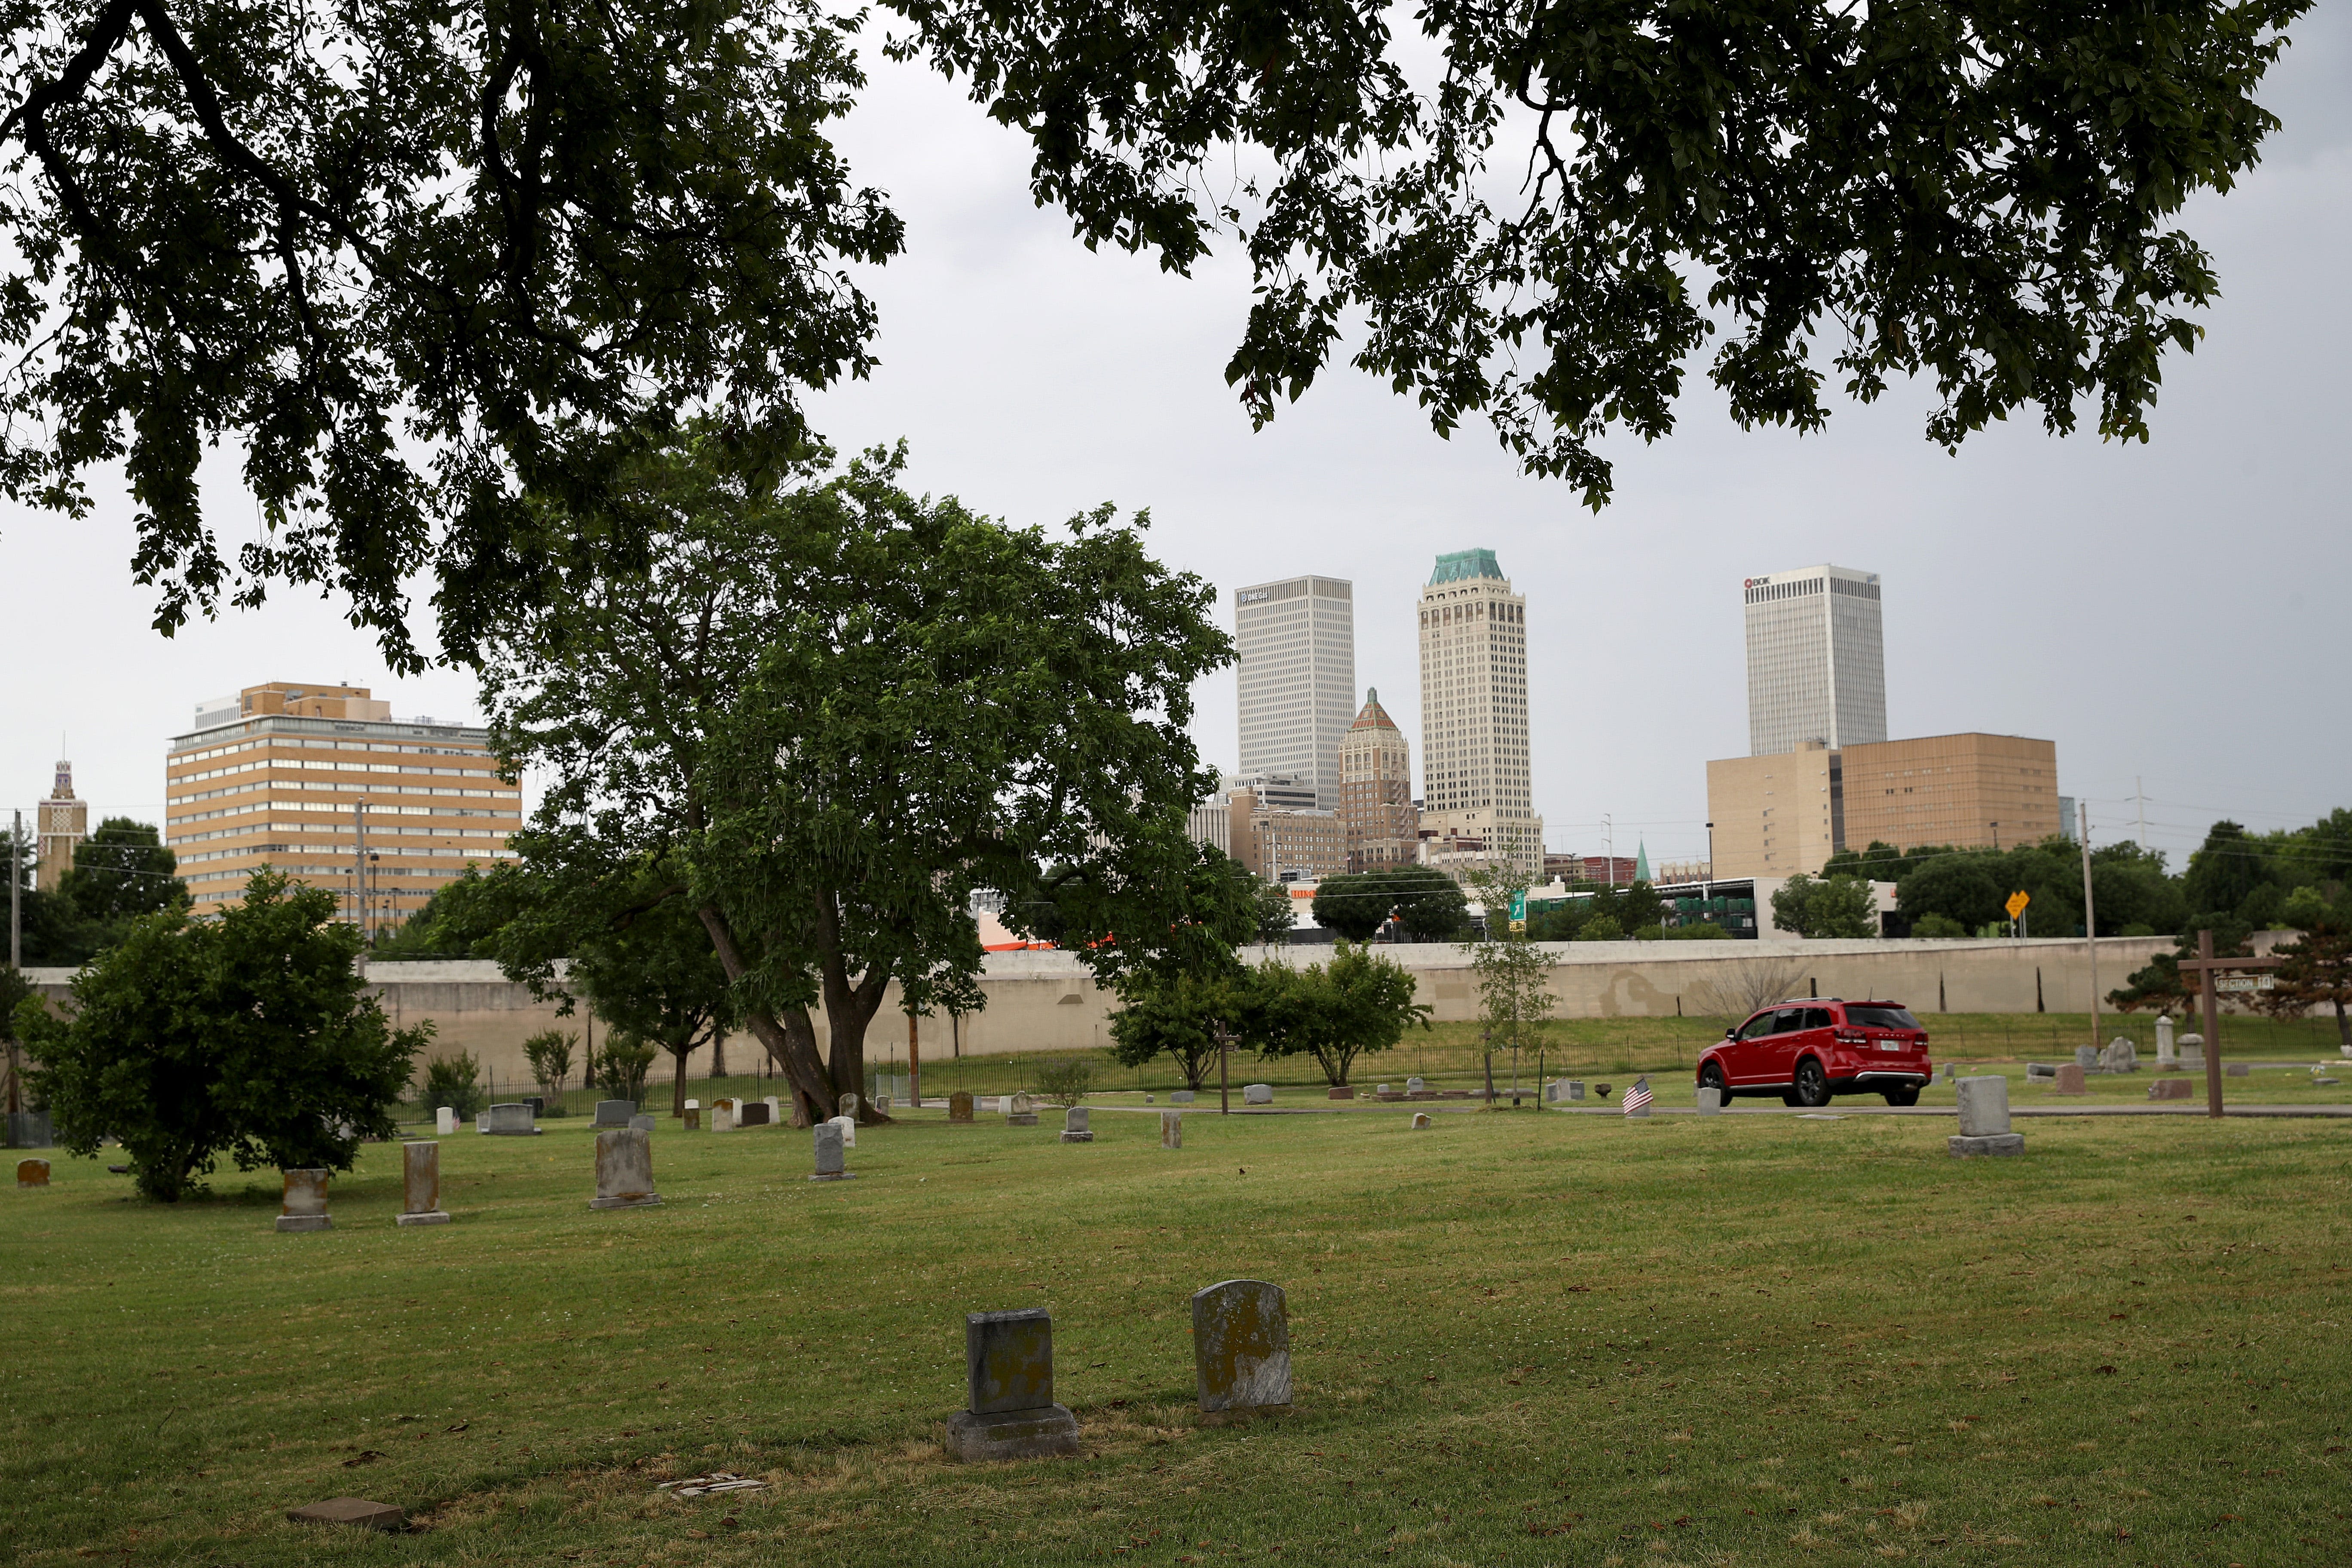 3rd set of remains with bullet wounds found with possible ties to 1921 Tulsa Race Massacre